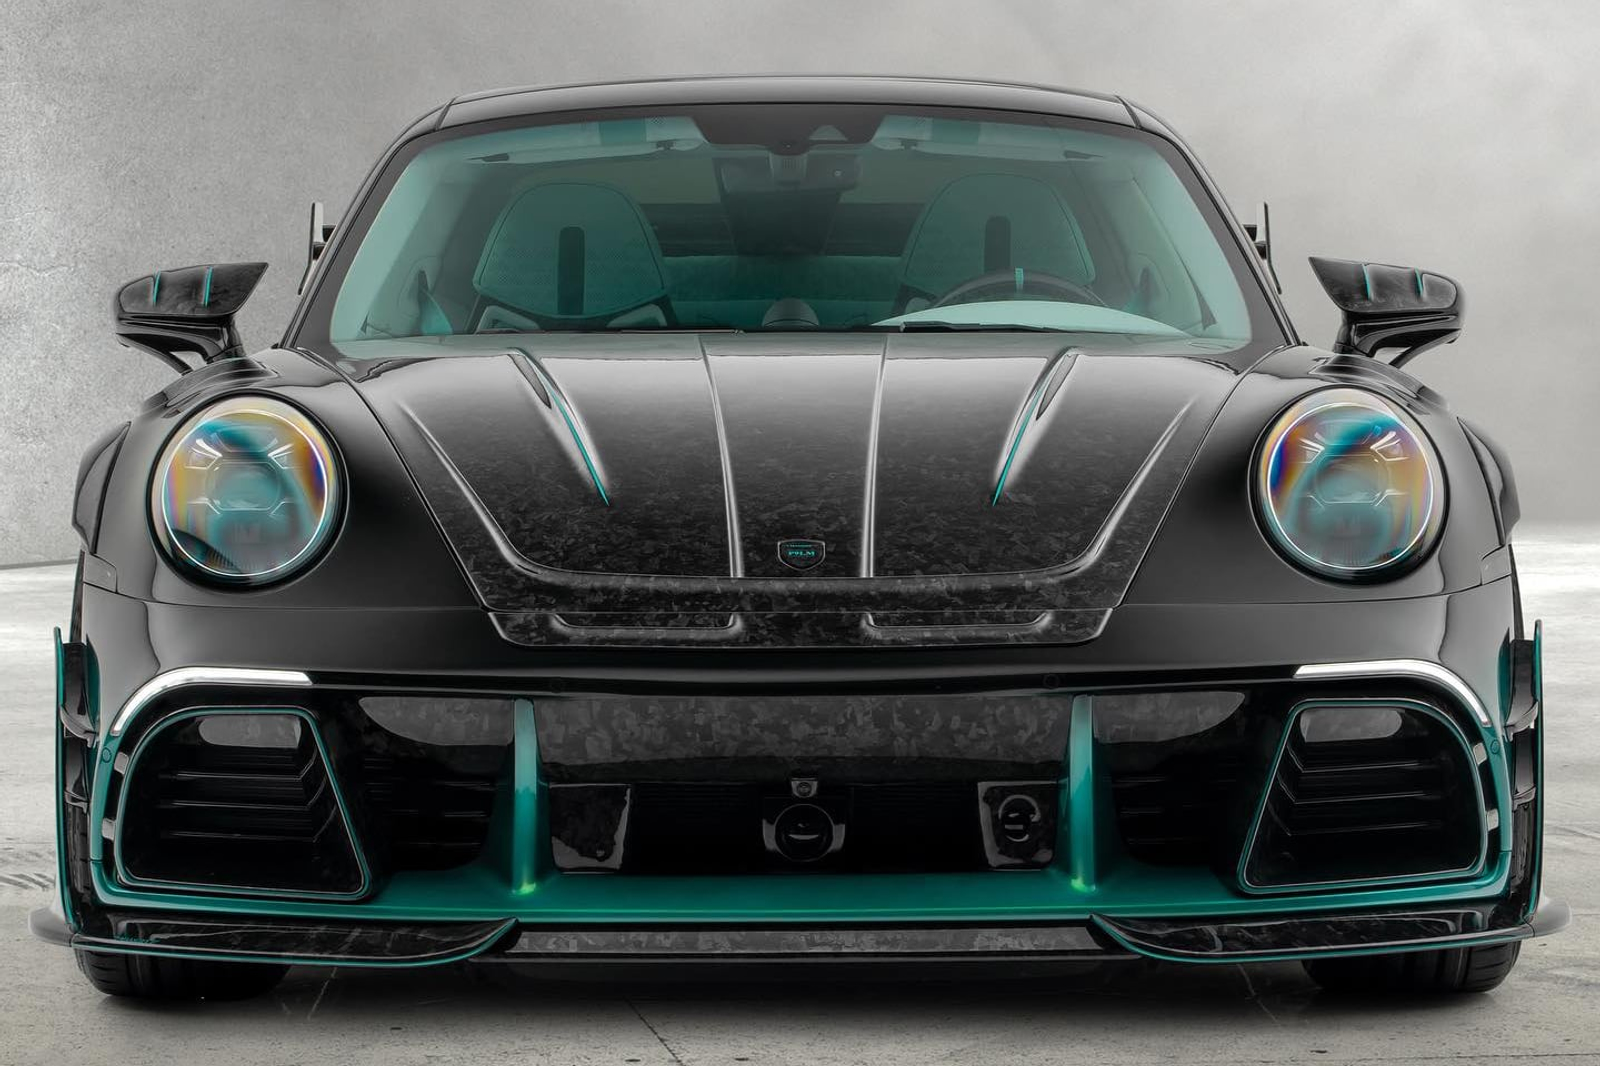 tuning, sports cars, not even 888 hp can save this mansory porsche 911 turbo s